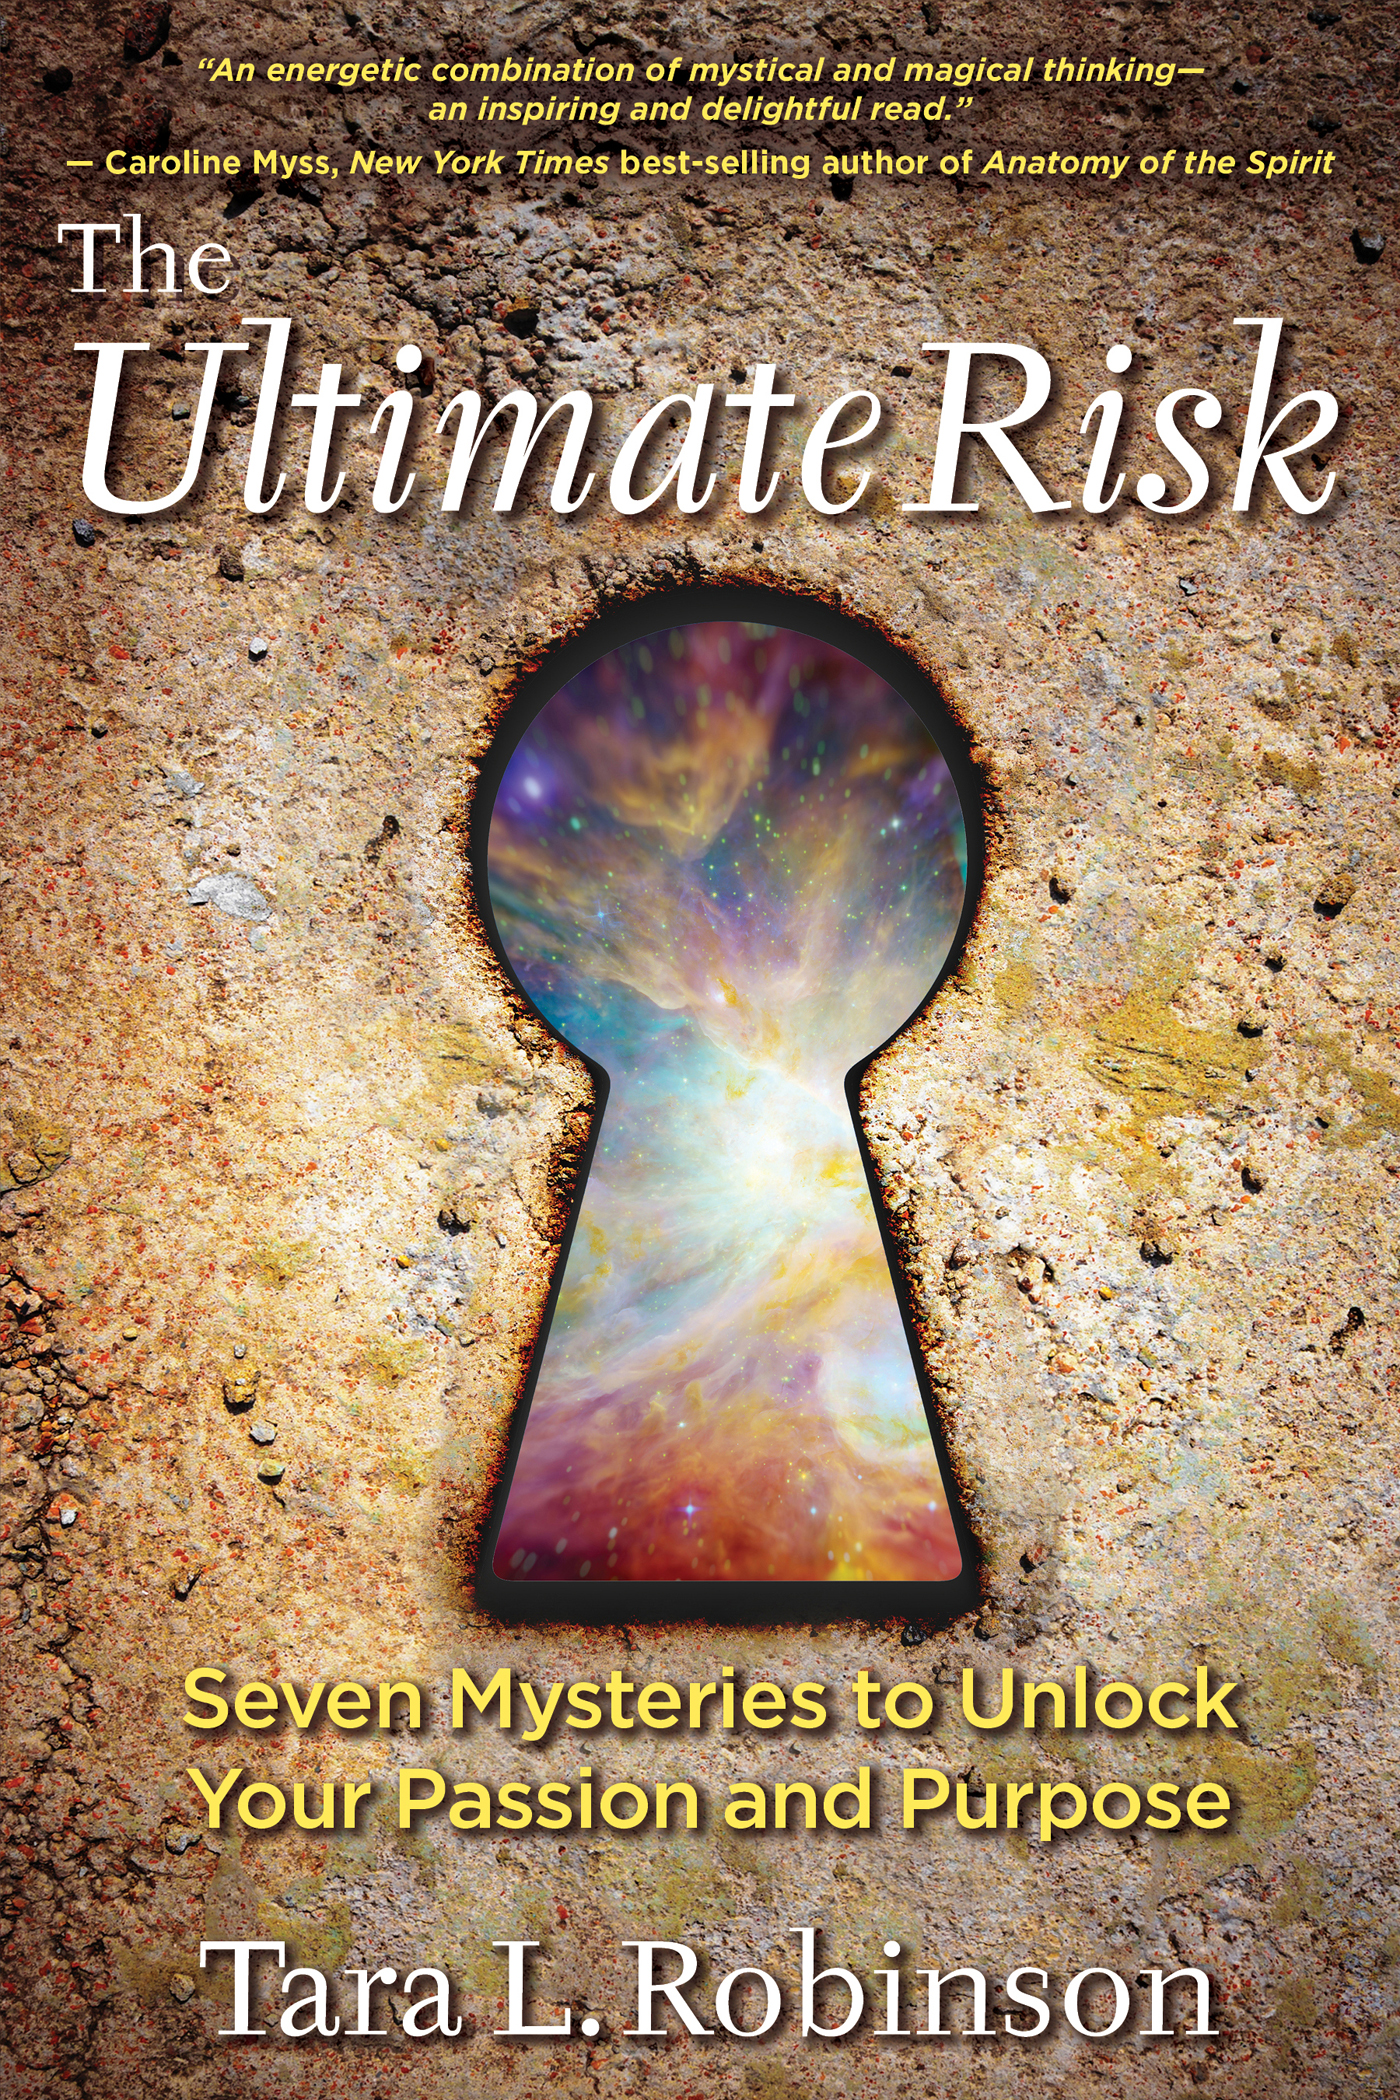 Praise for The Ultimate Risk The Ultimate Risk is an energetic combination - photo 1